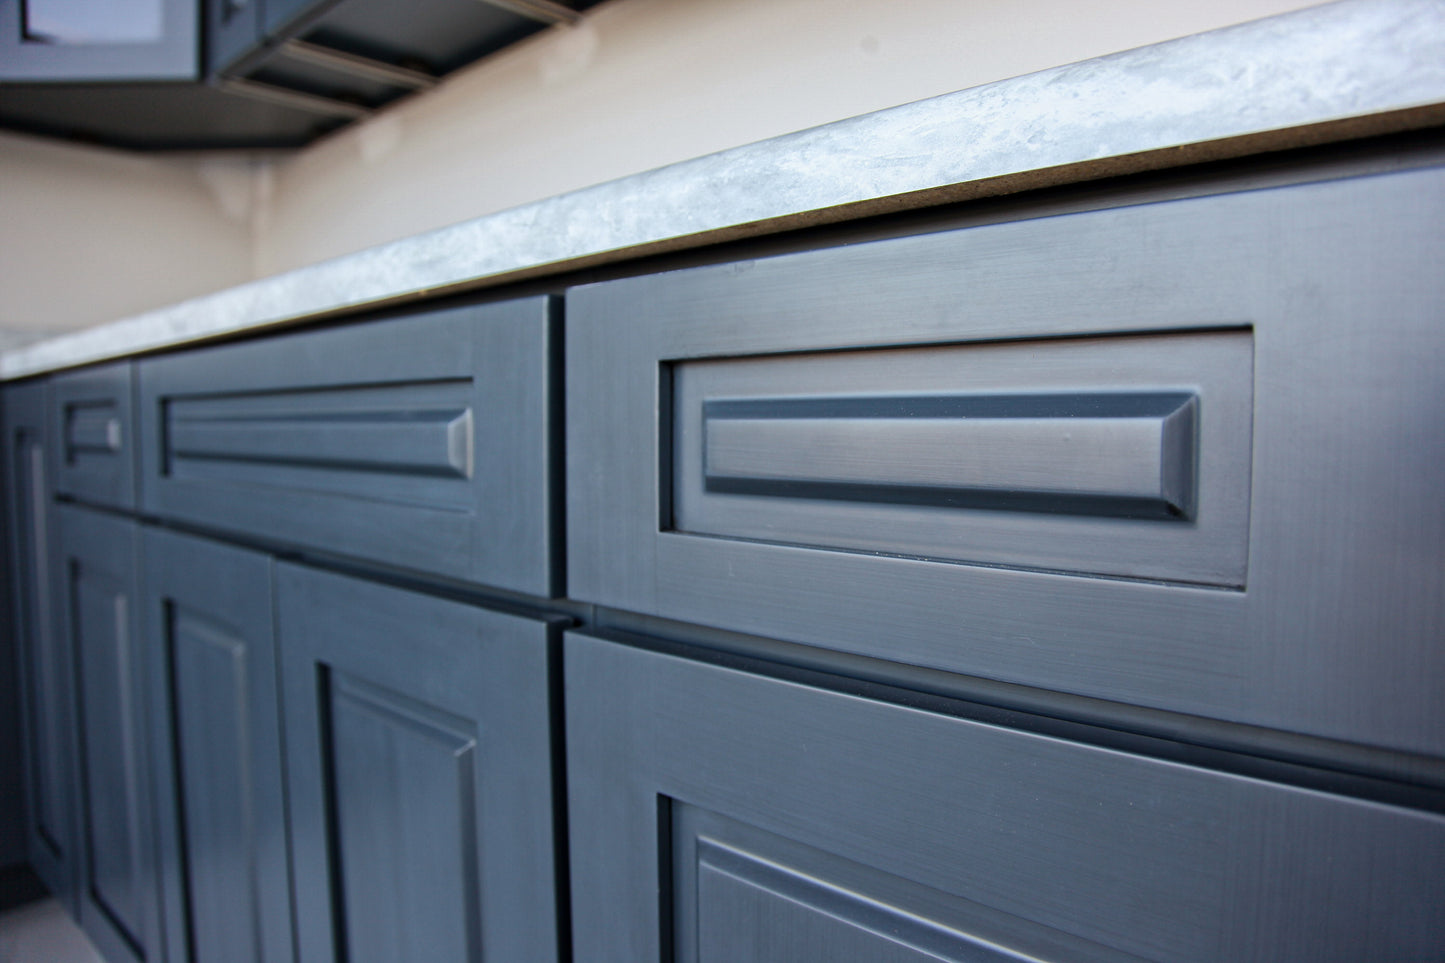 Pacific Blue Raised Panel Cabinets